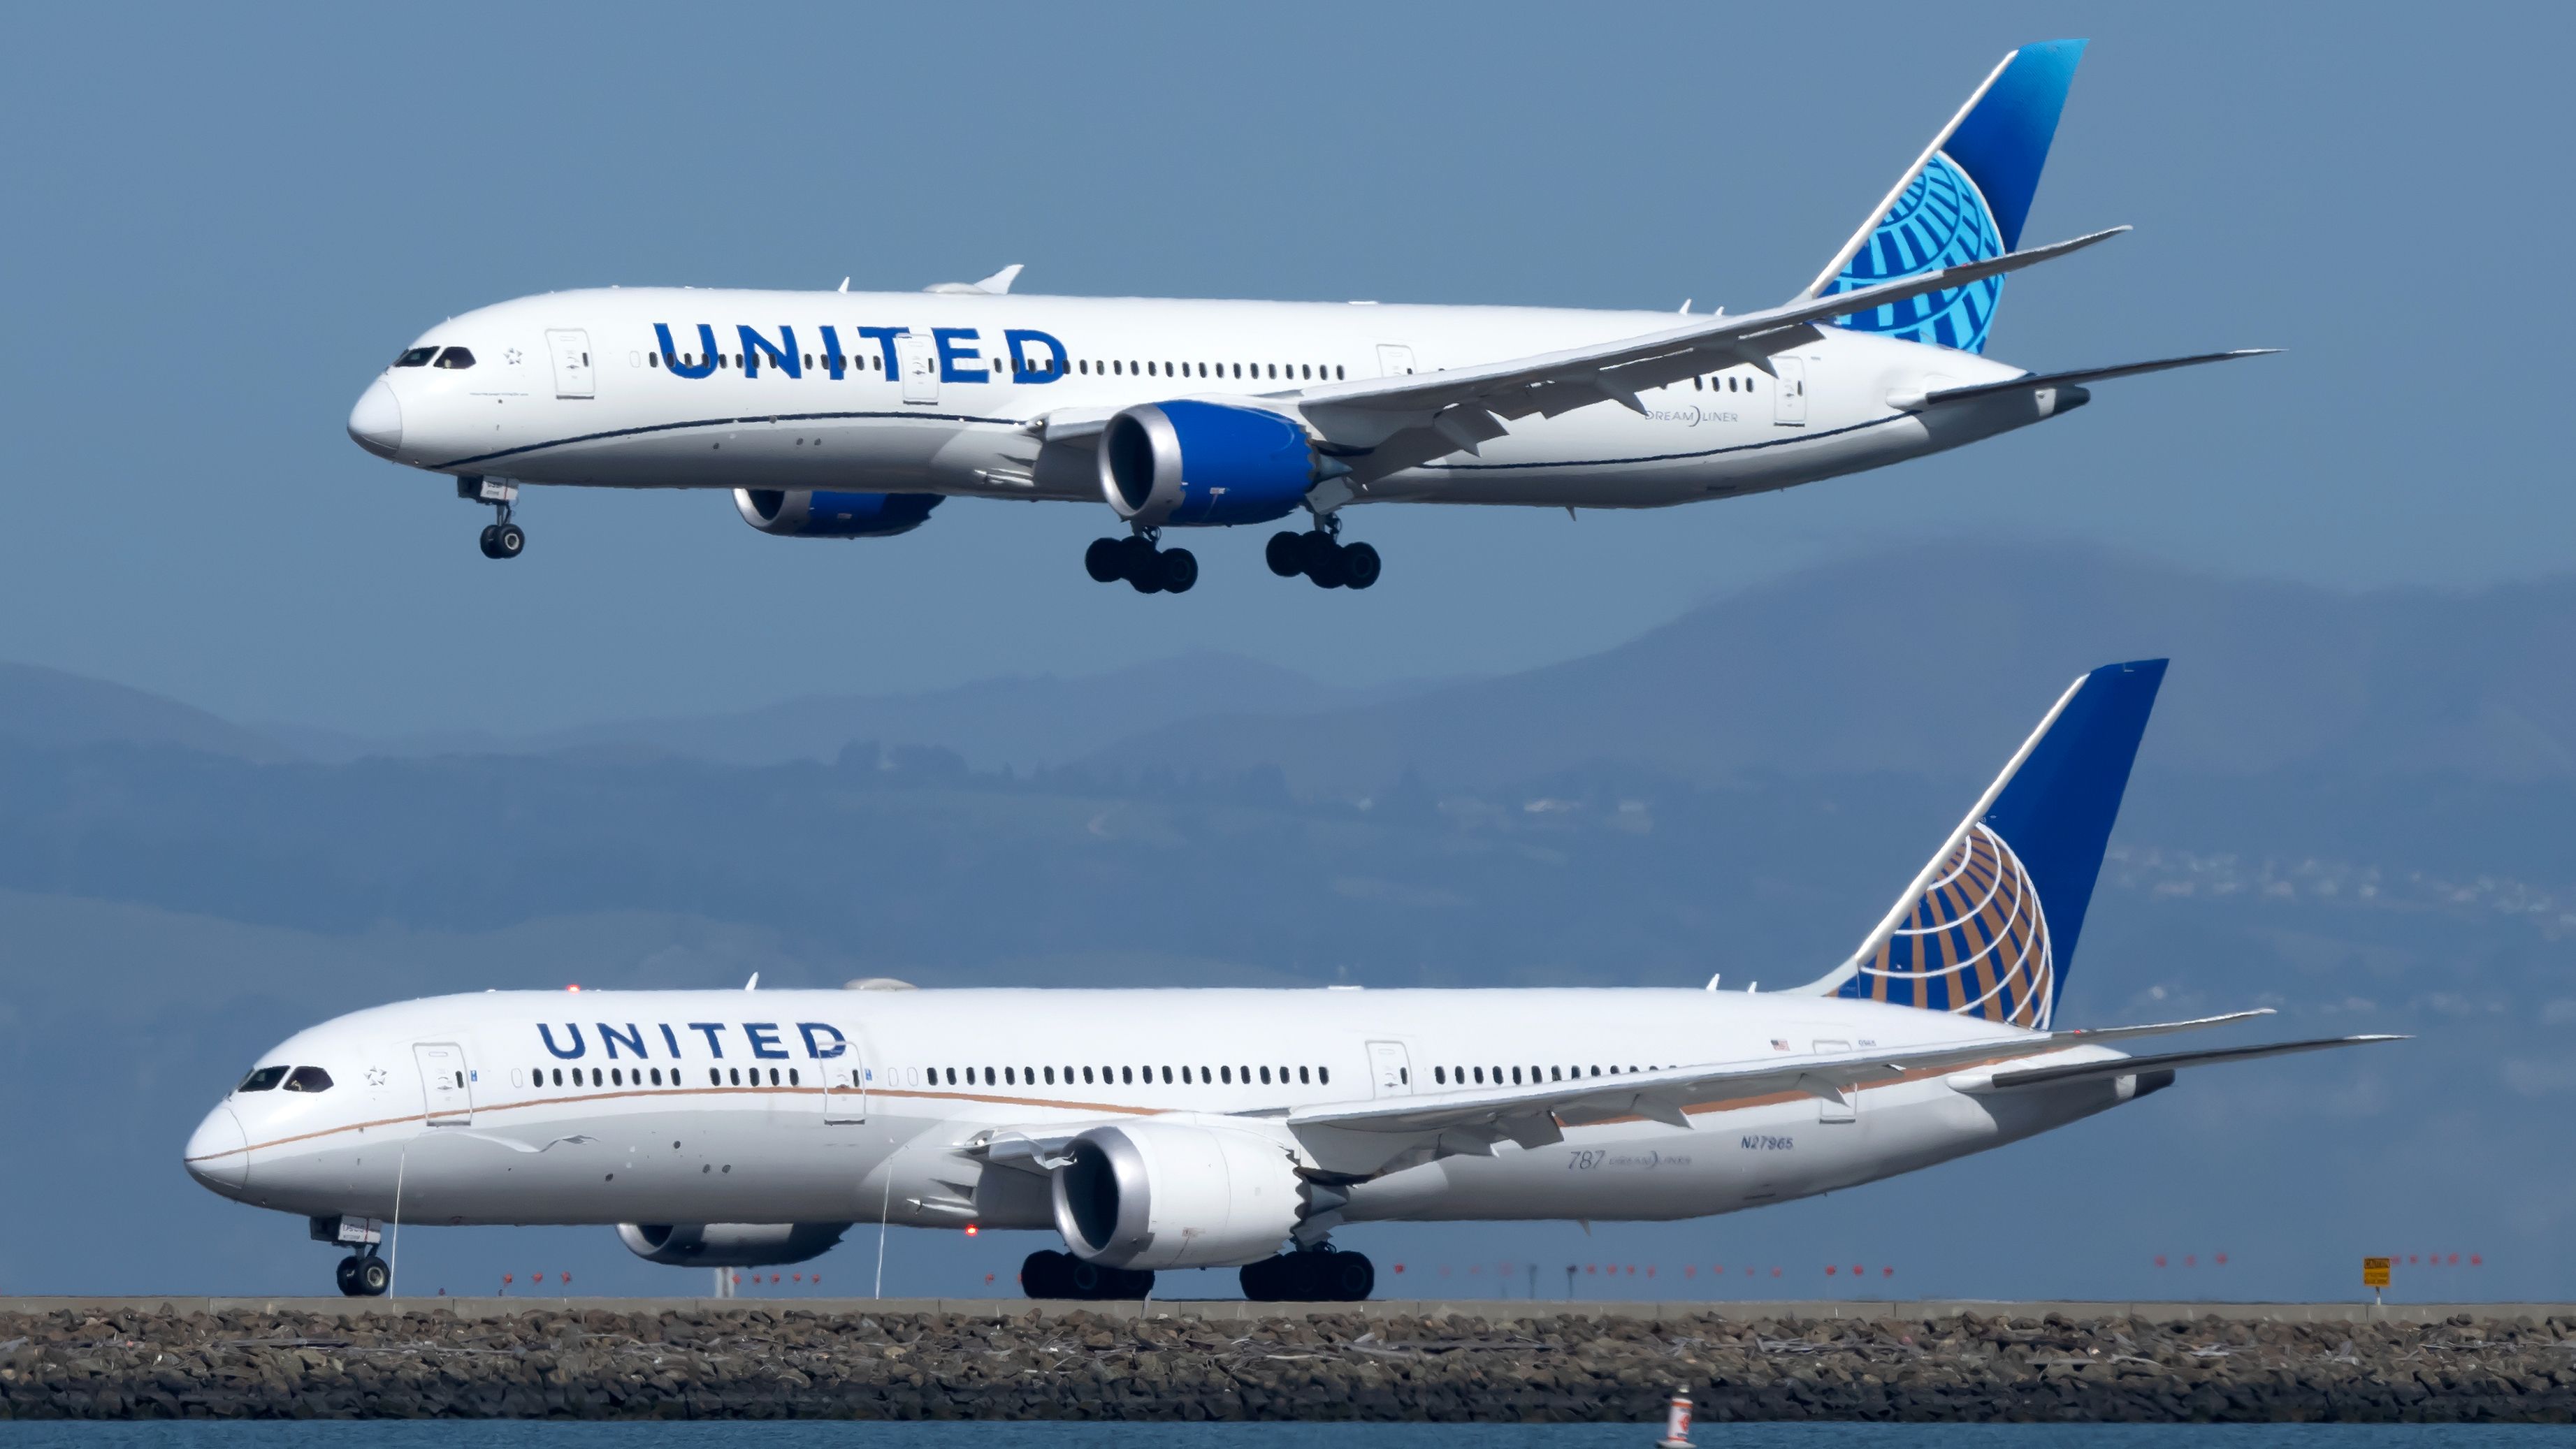 Two United Airlines Boeing 787 Dreamliners, one on a taxiway and the other in the air about to land.